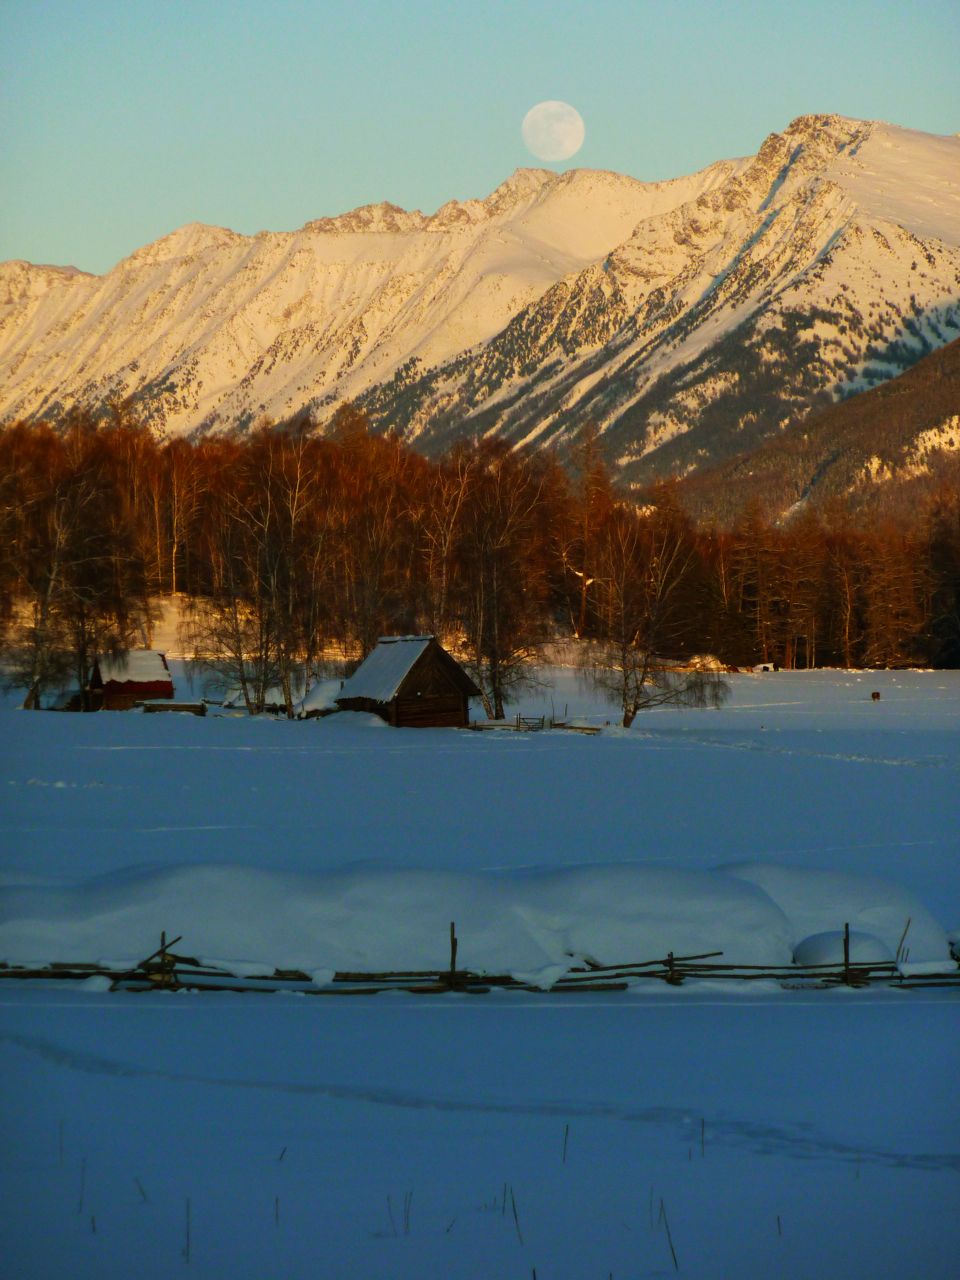 I have traveled to Tubek every trip as it has a lot of skiers and is a beautiful area. This last winter (2010) had the most snow of any of the trips so far and there was a lot of skis being used as a result. We had a beautiful moon while there.